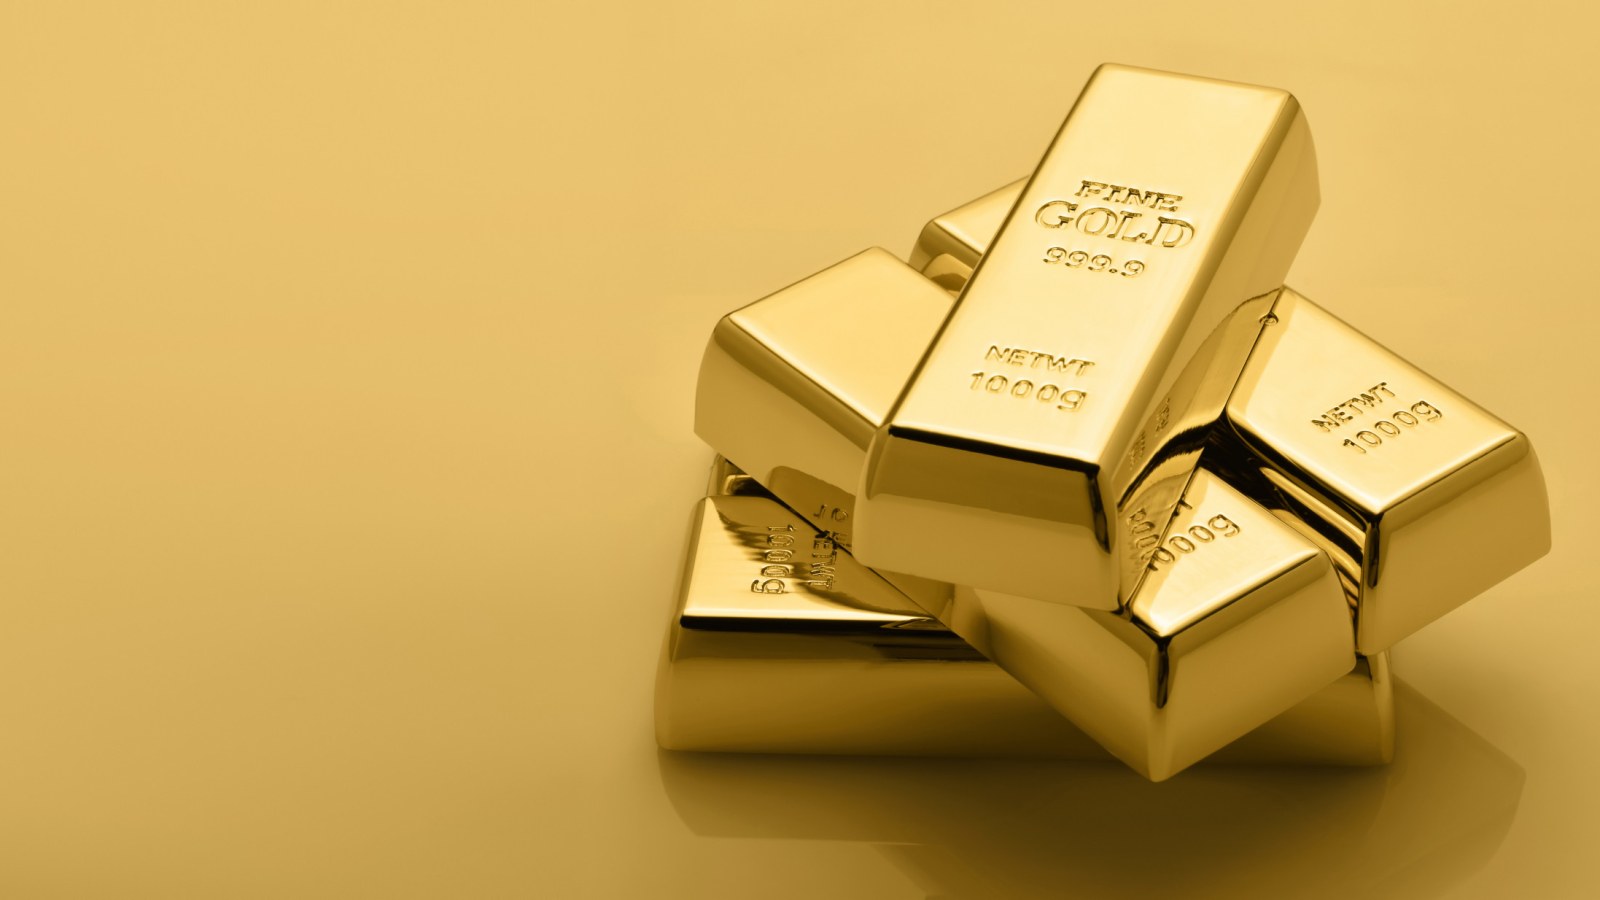 Investing Wisely: A Thorough Review of a Notable Gold Investment Company